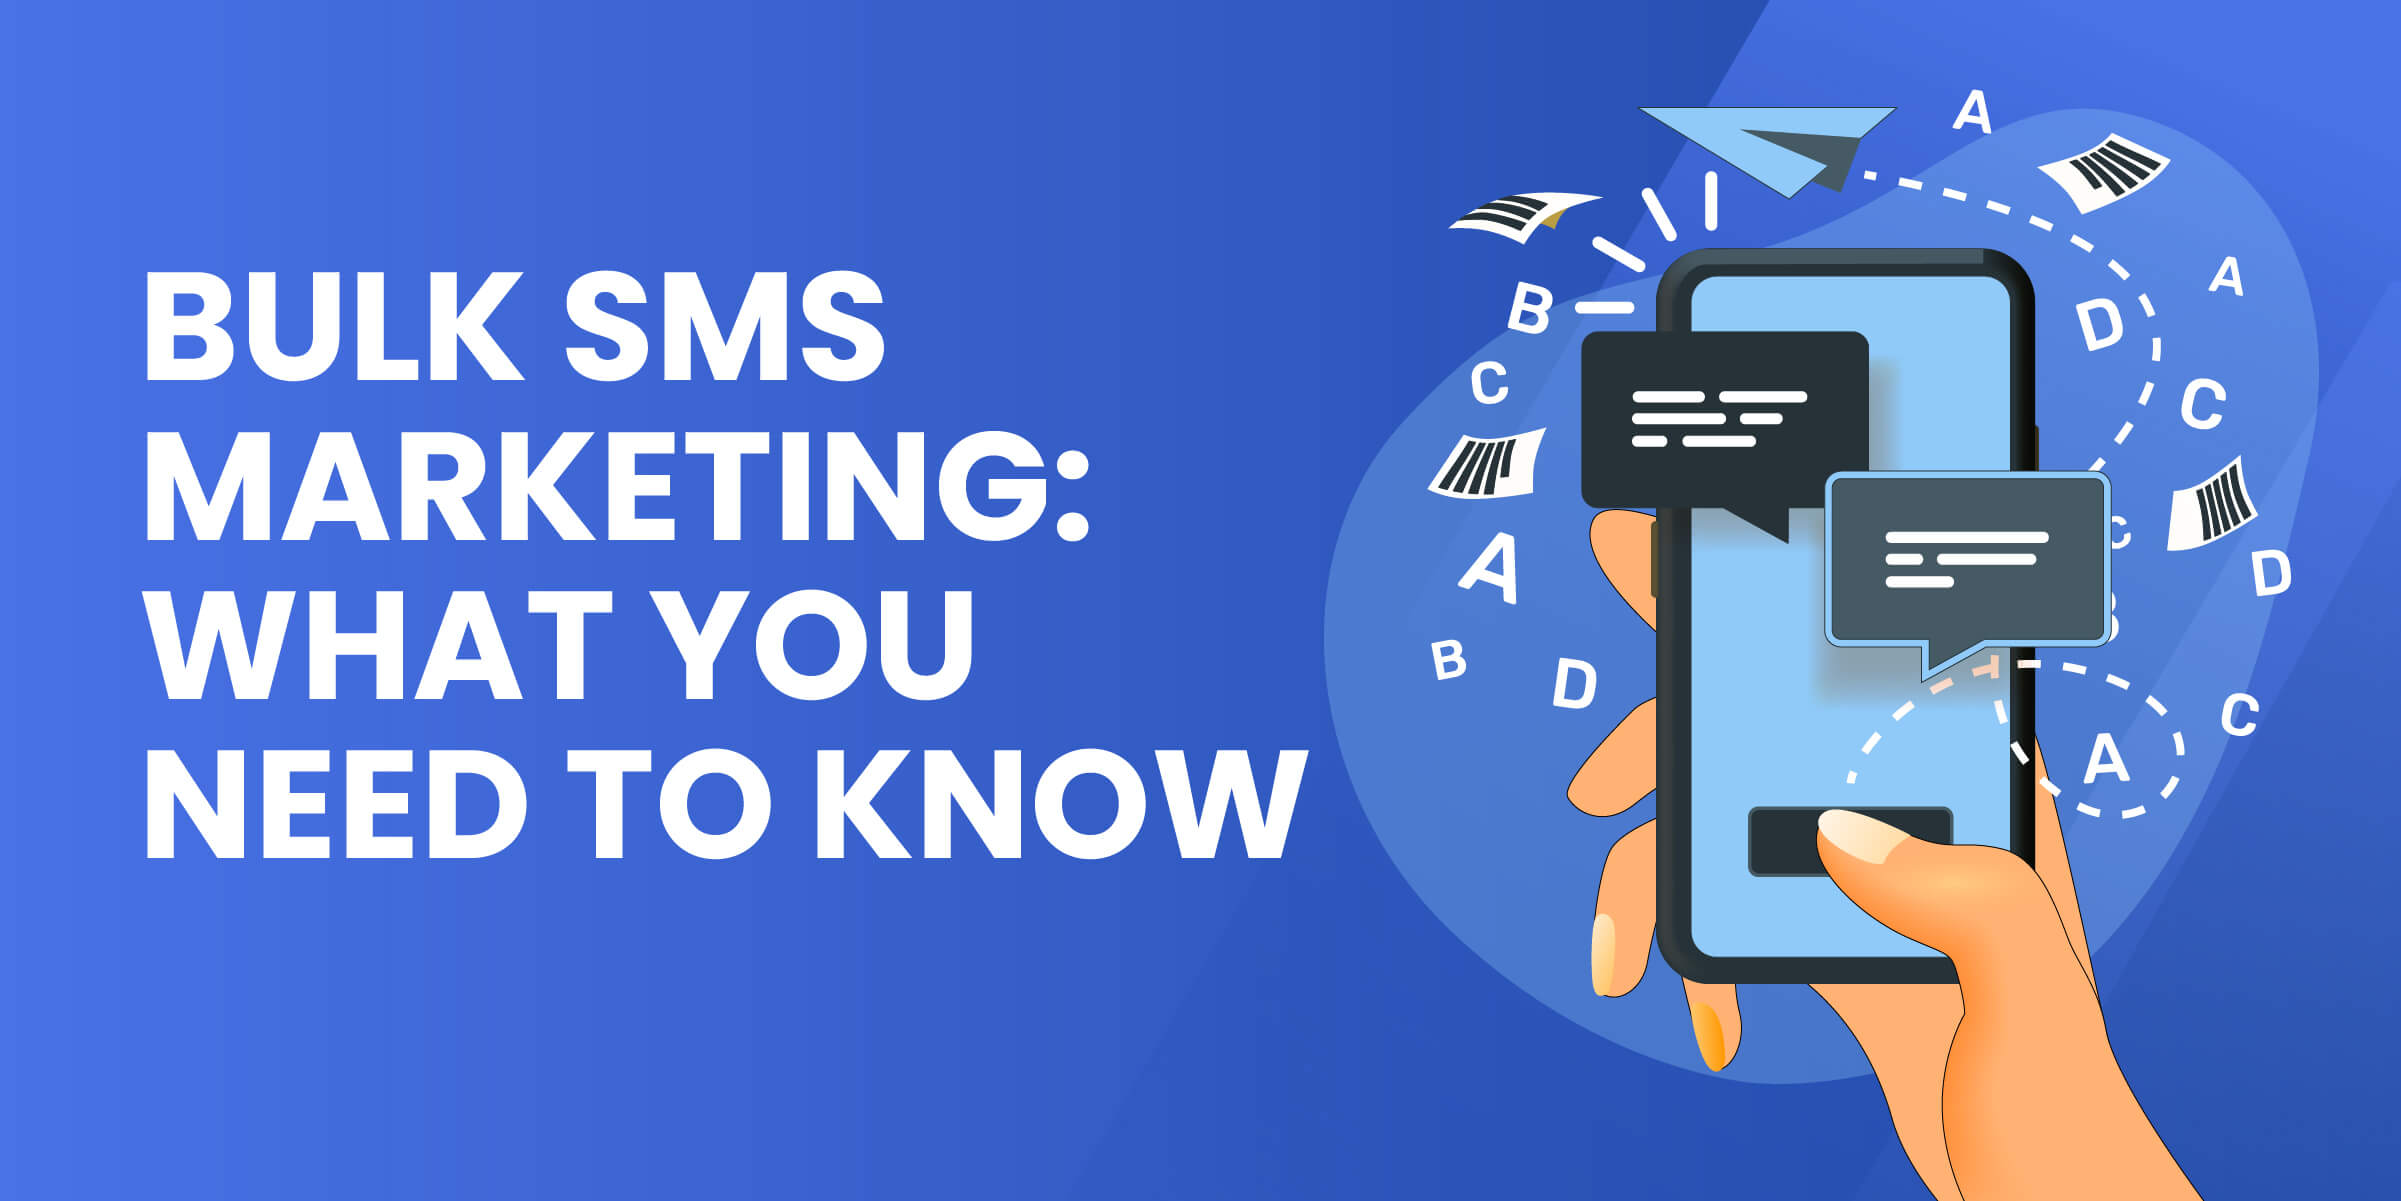 Bulk SMS Marketing What You Need to Know